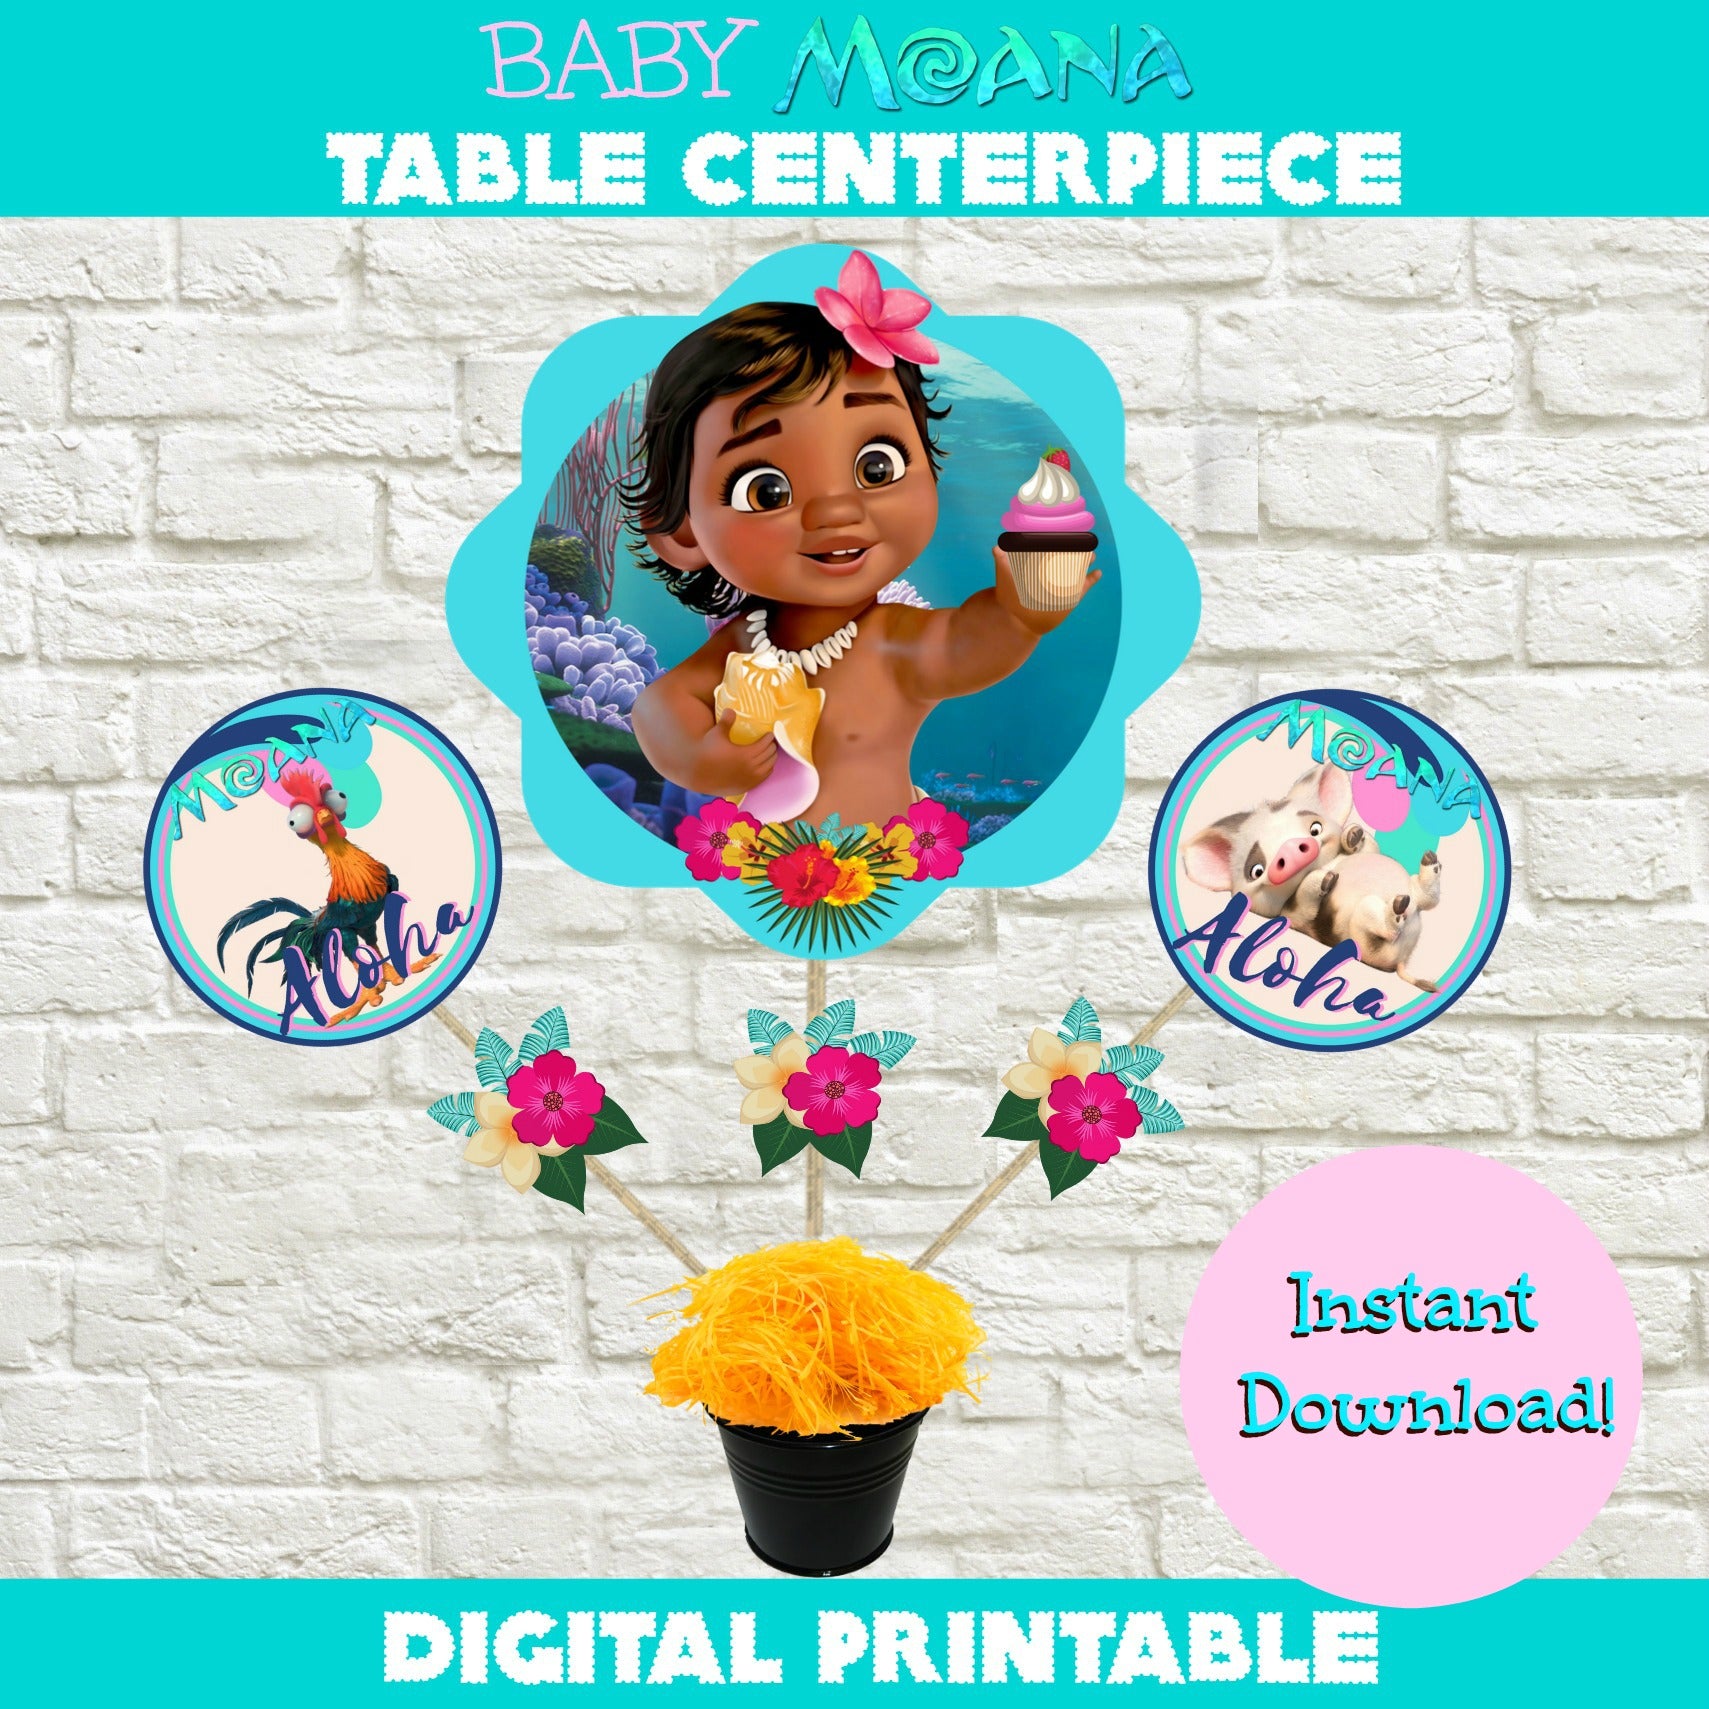 K's Creations - 10 Baby Moana Centerpieces for a 2nd